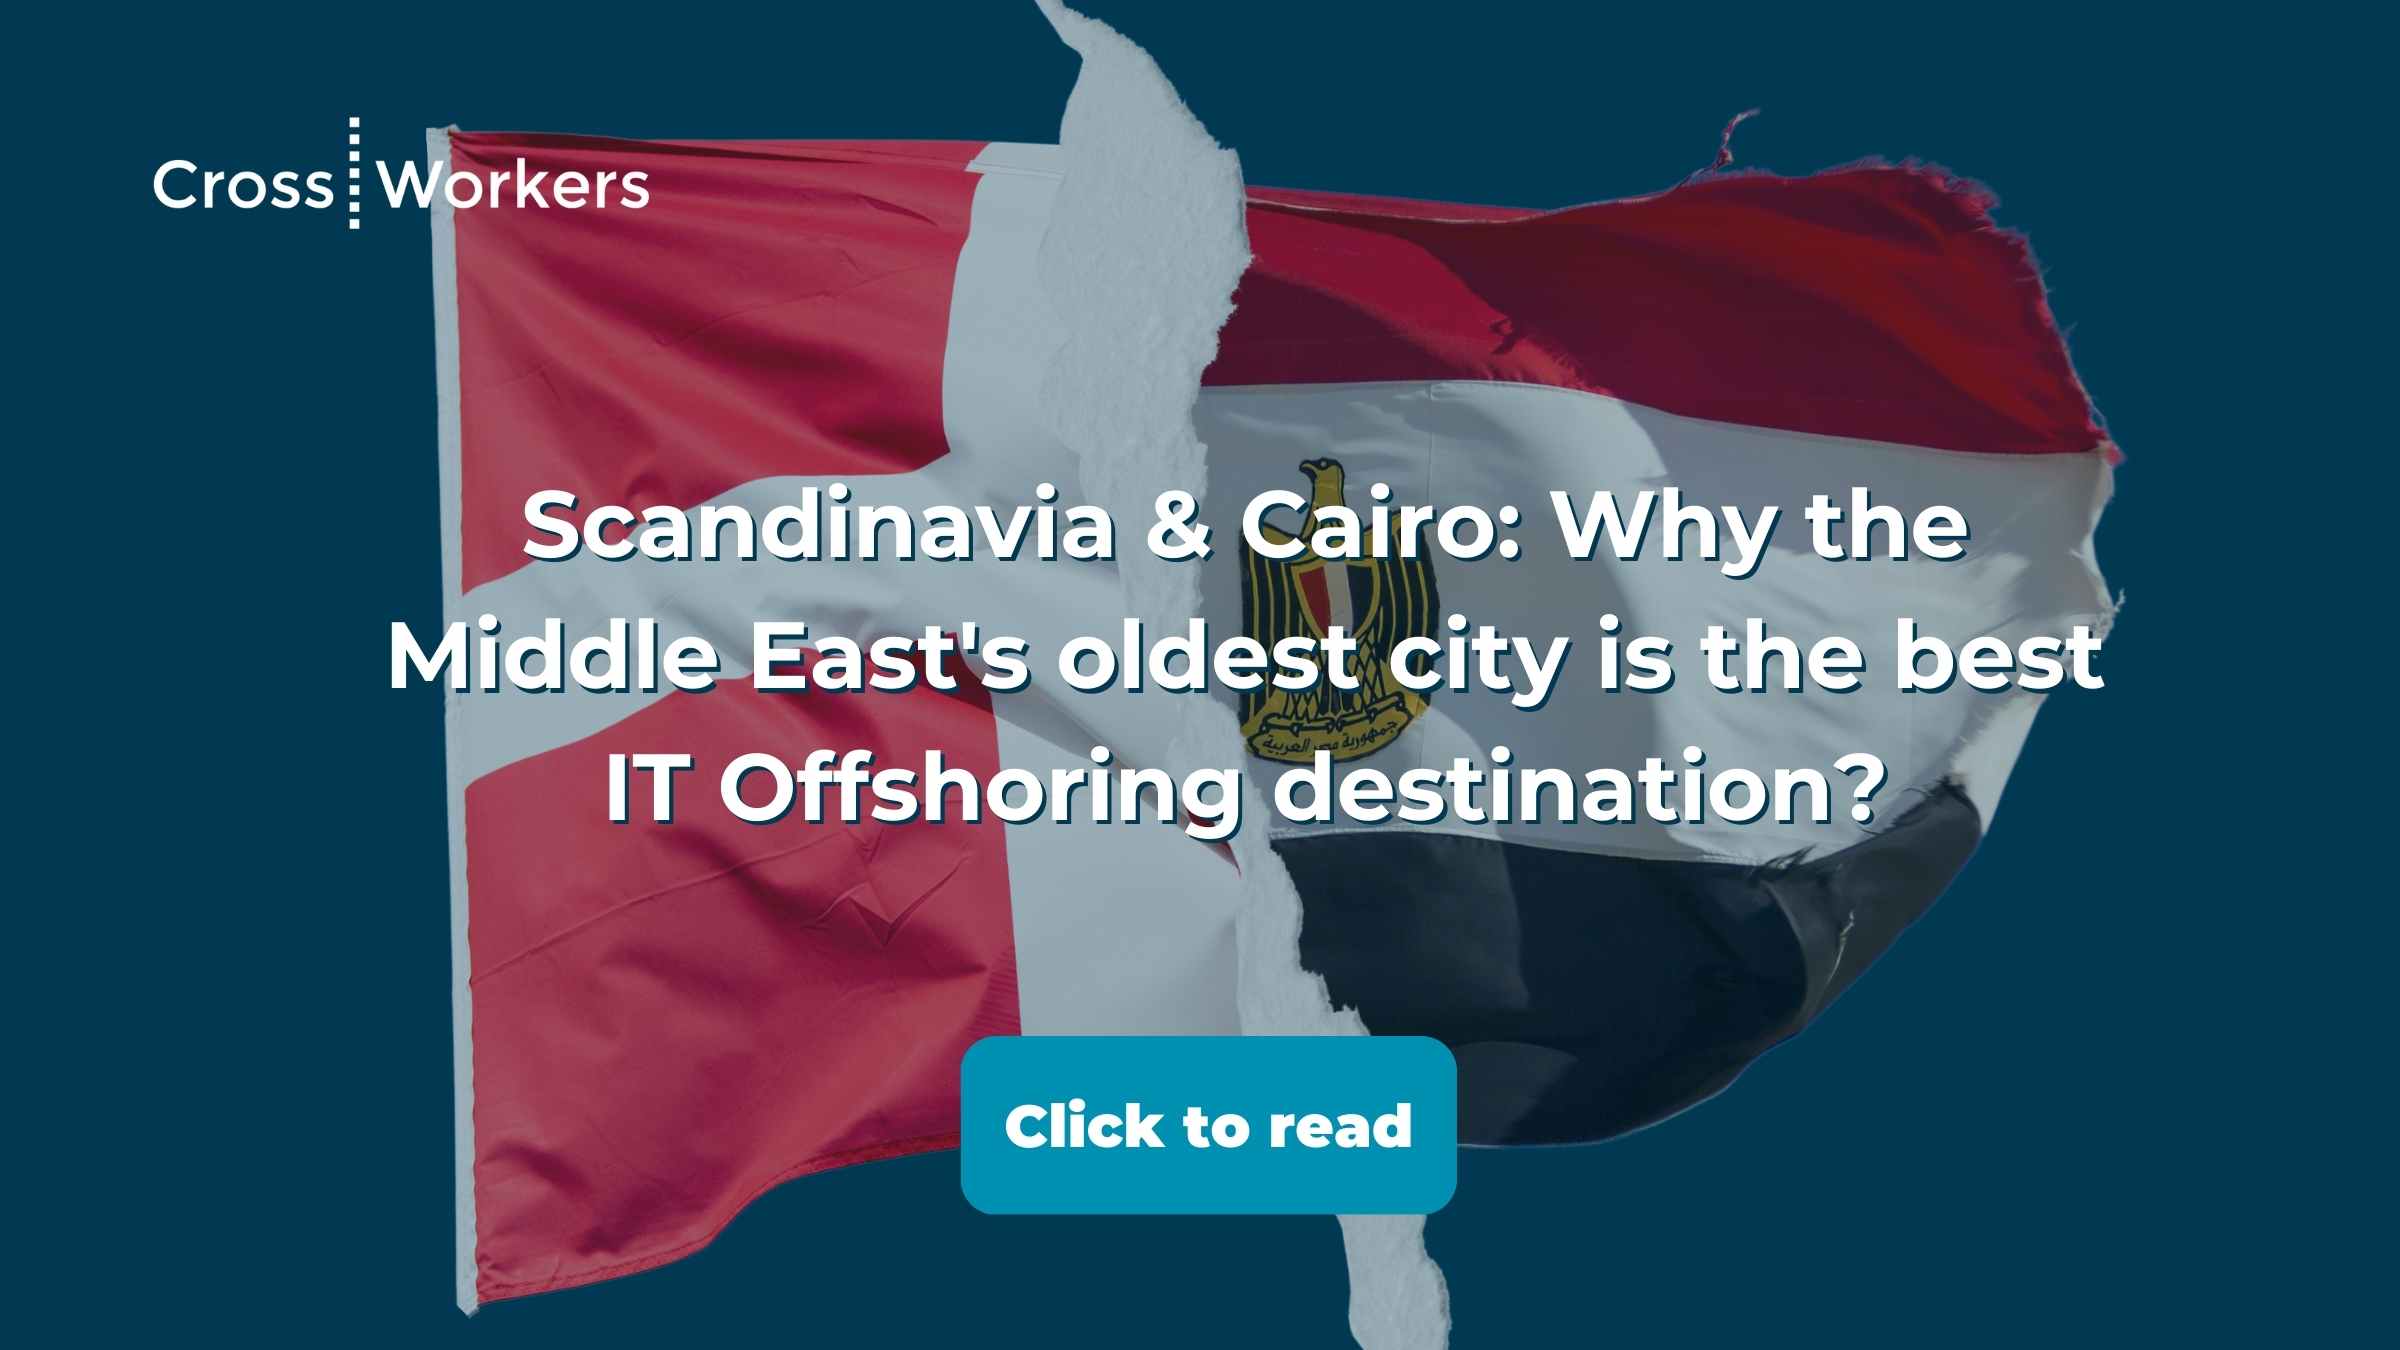 Scandinavia & Cairo: Why the Middle East's oldest city is the best IT Offshoring destination?